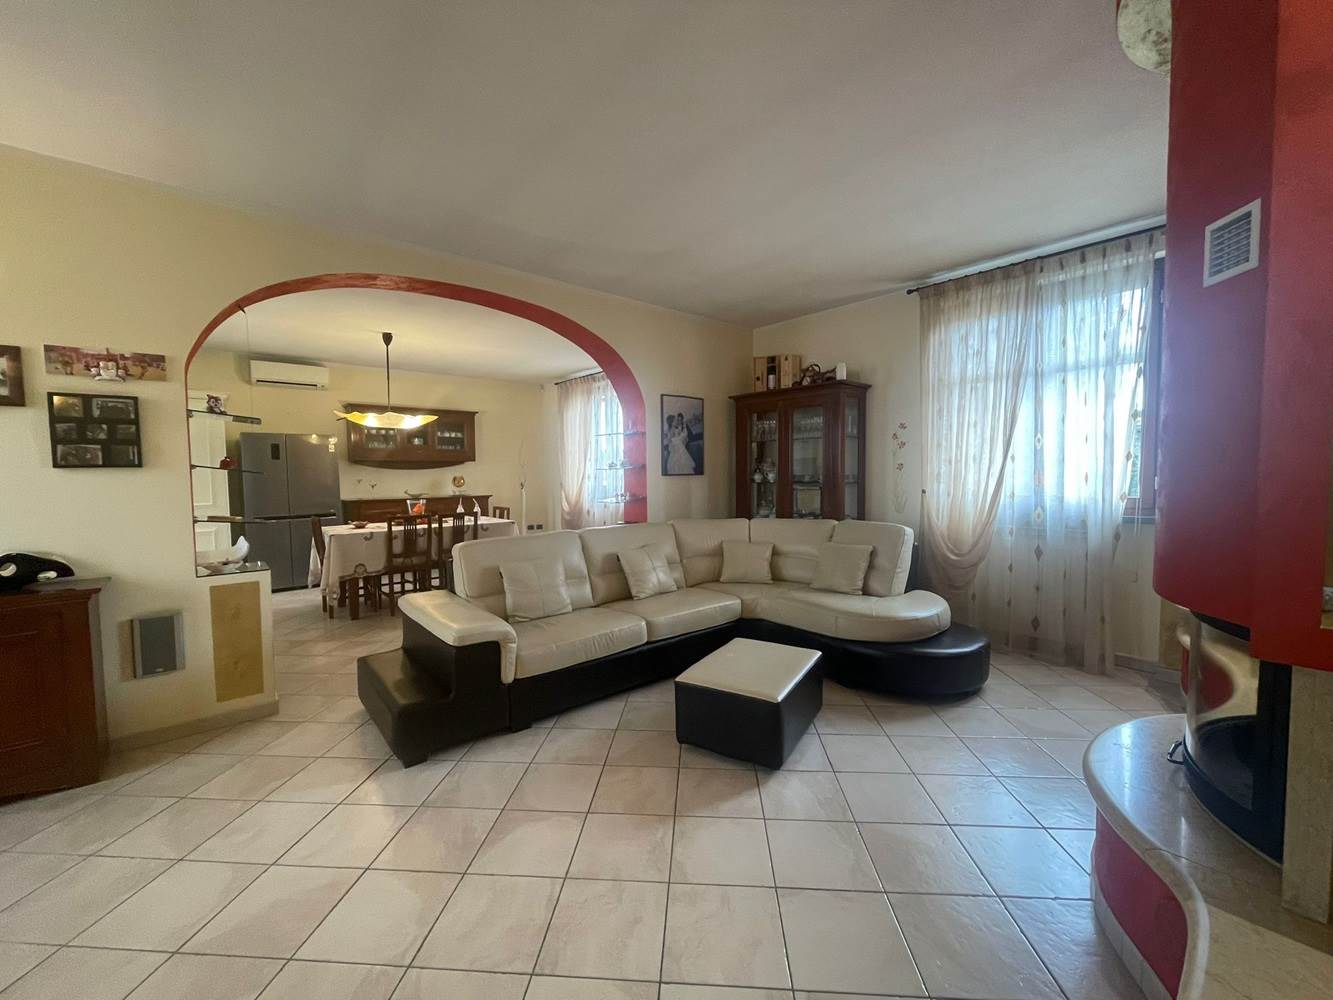 NERI, CAVRIGLIA, Duplex villa for sale of 300 Sq. mt., Excellent Condition, Heating Individual heating system, Energetic class: G, placed at Ground 